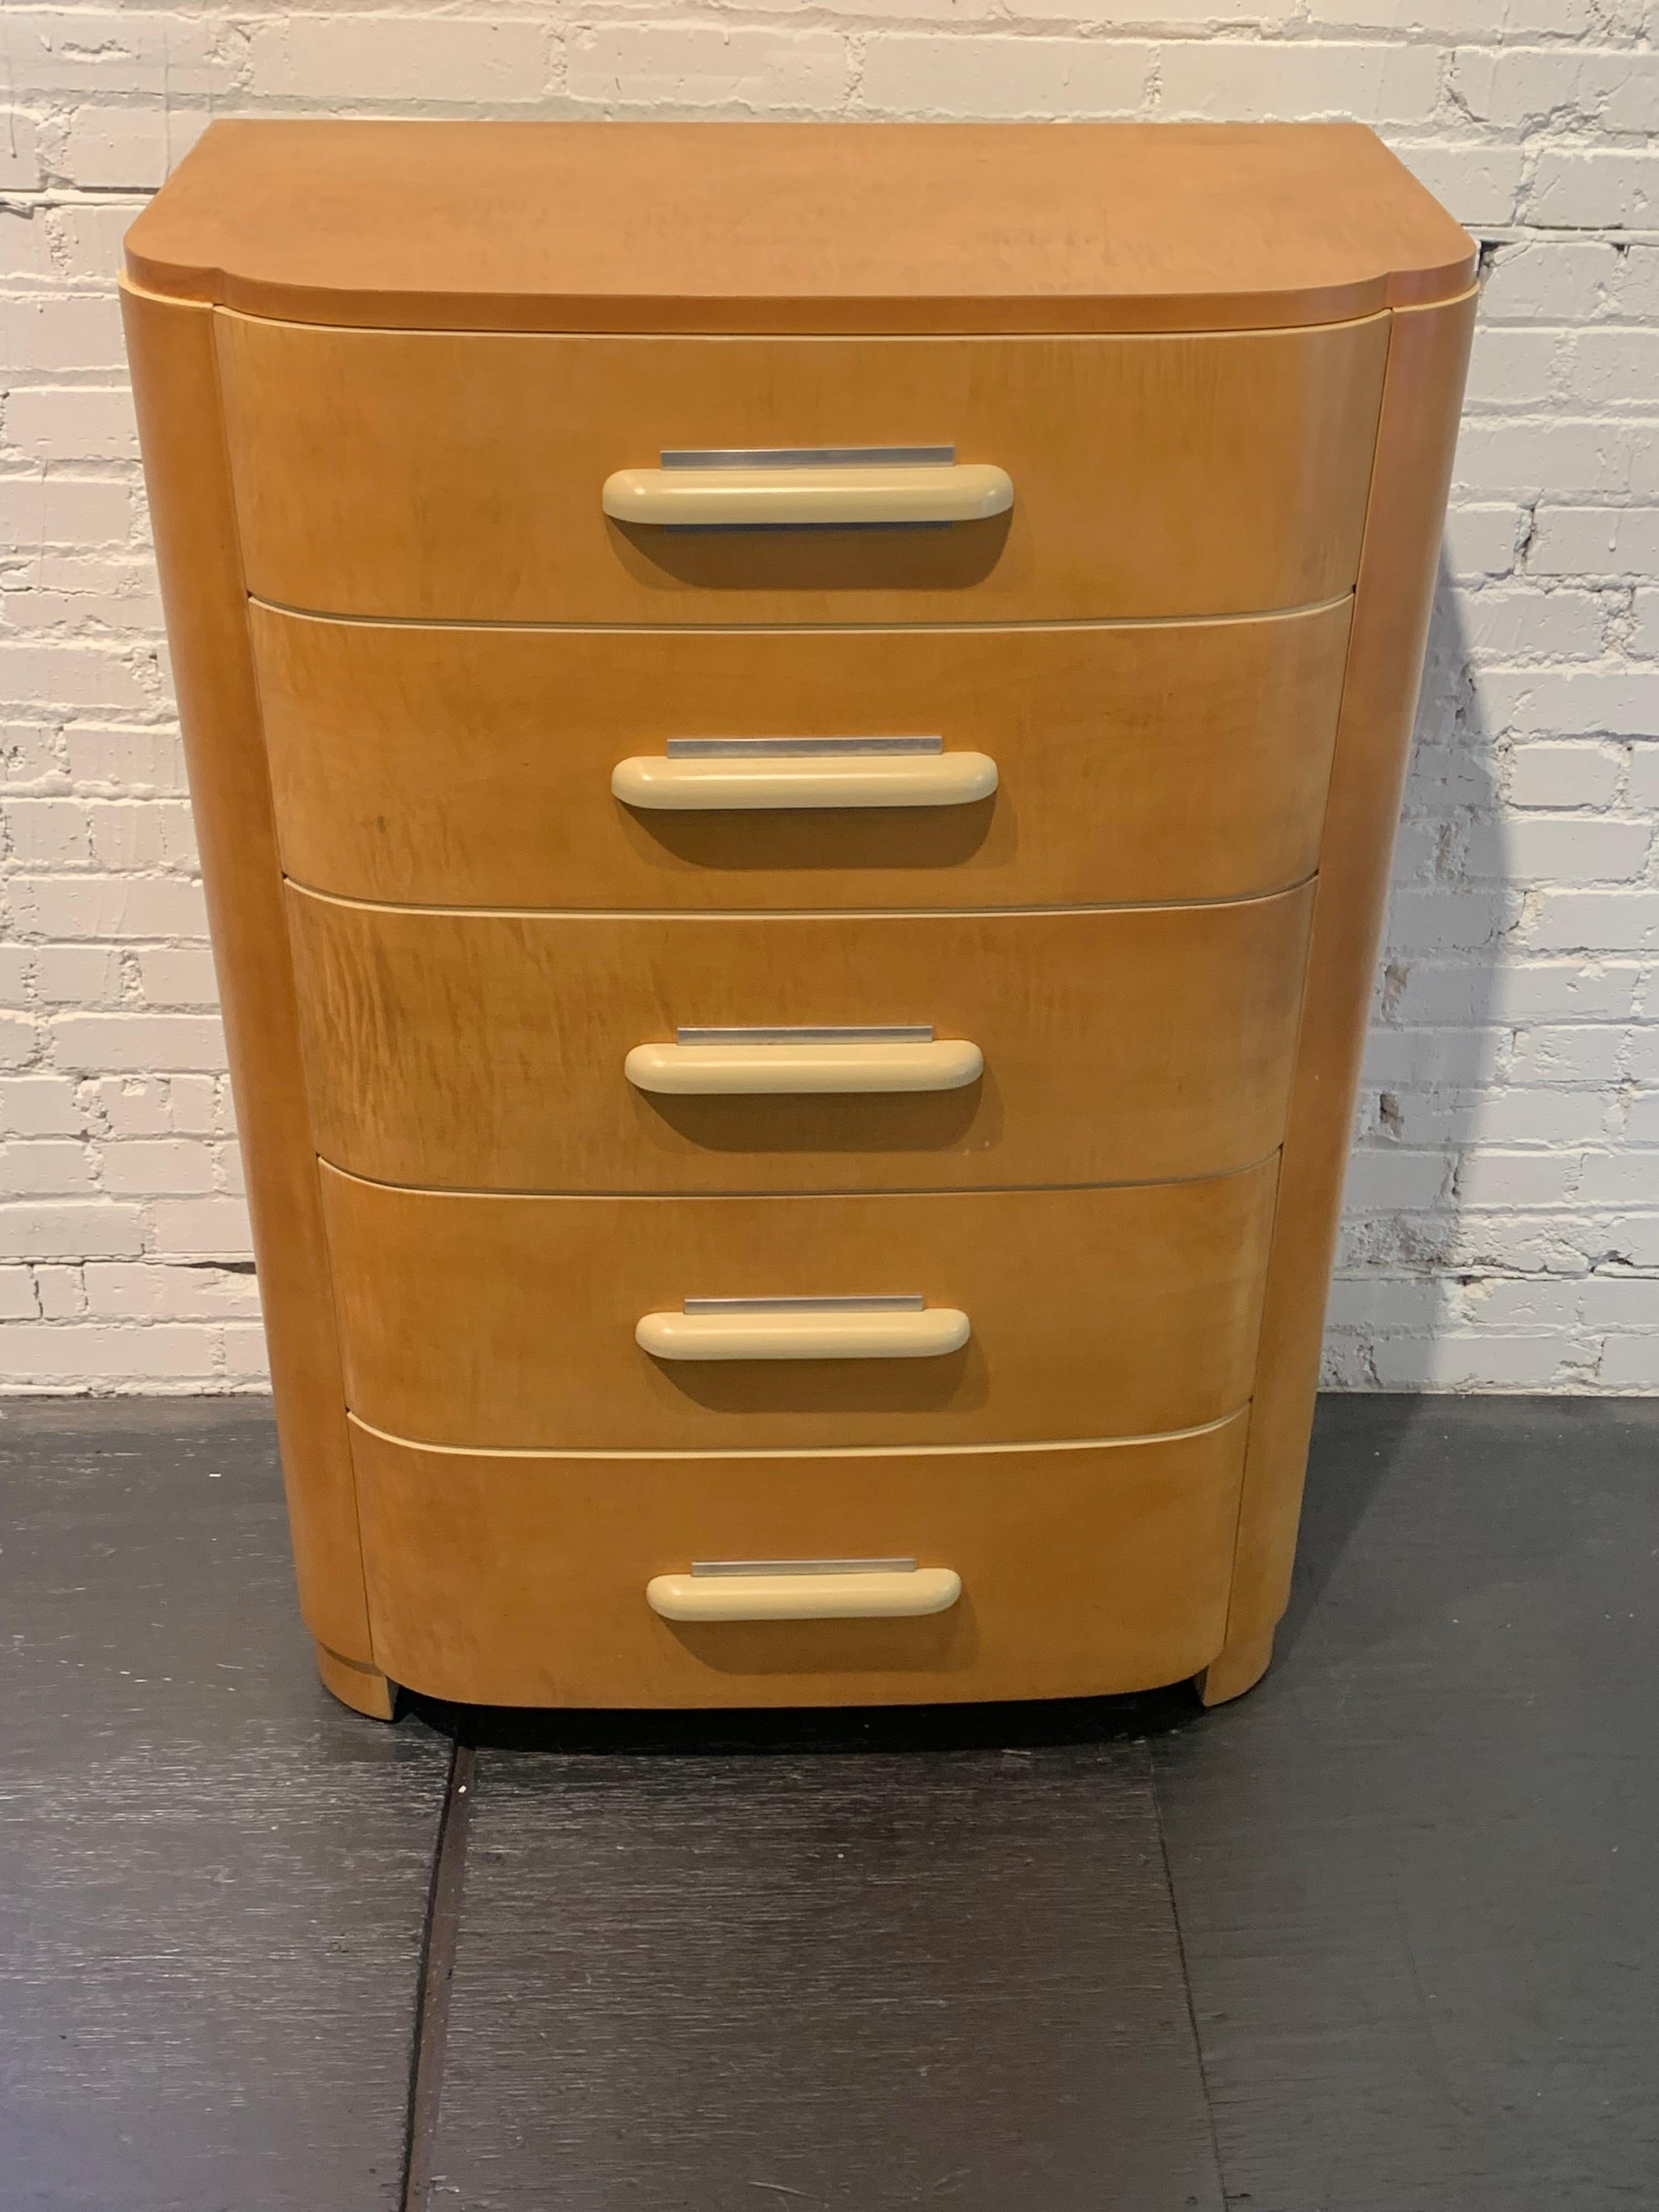 Wonderful period streamline Art Deco design highboy dresser by Donald Deskey (1894-1989) for Widdicomb furniture in maple veneer and aluminum details. Cream lacquered handles and highlights. Older restoration, saw very little use since restored,